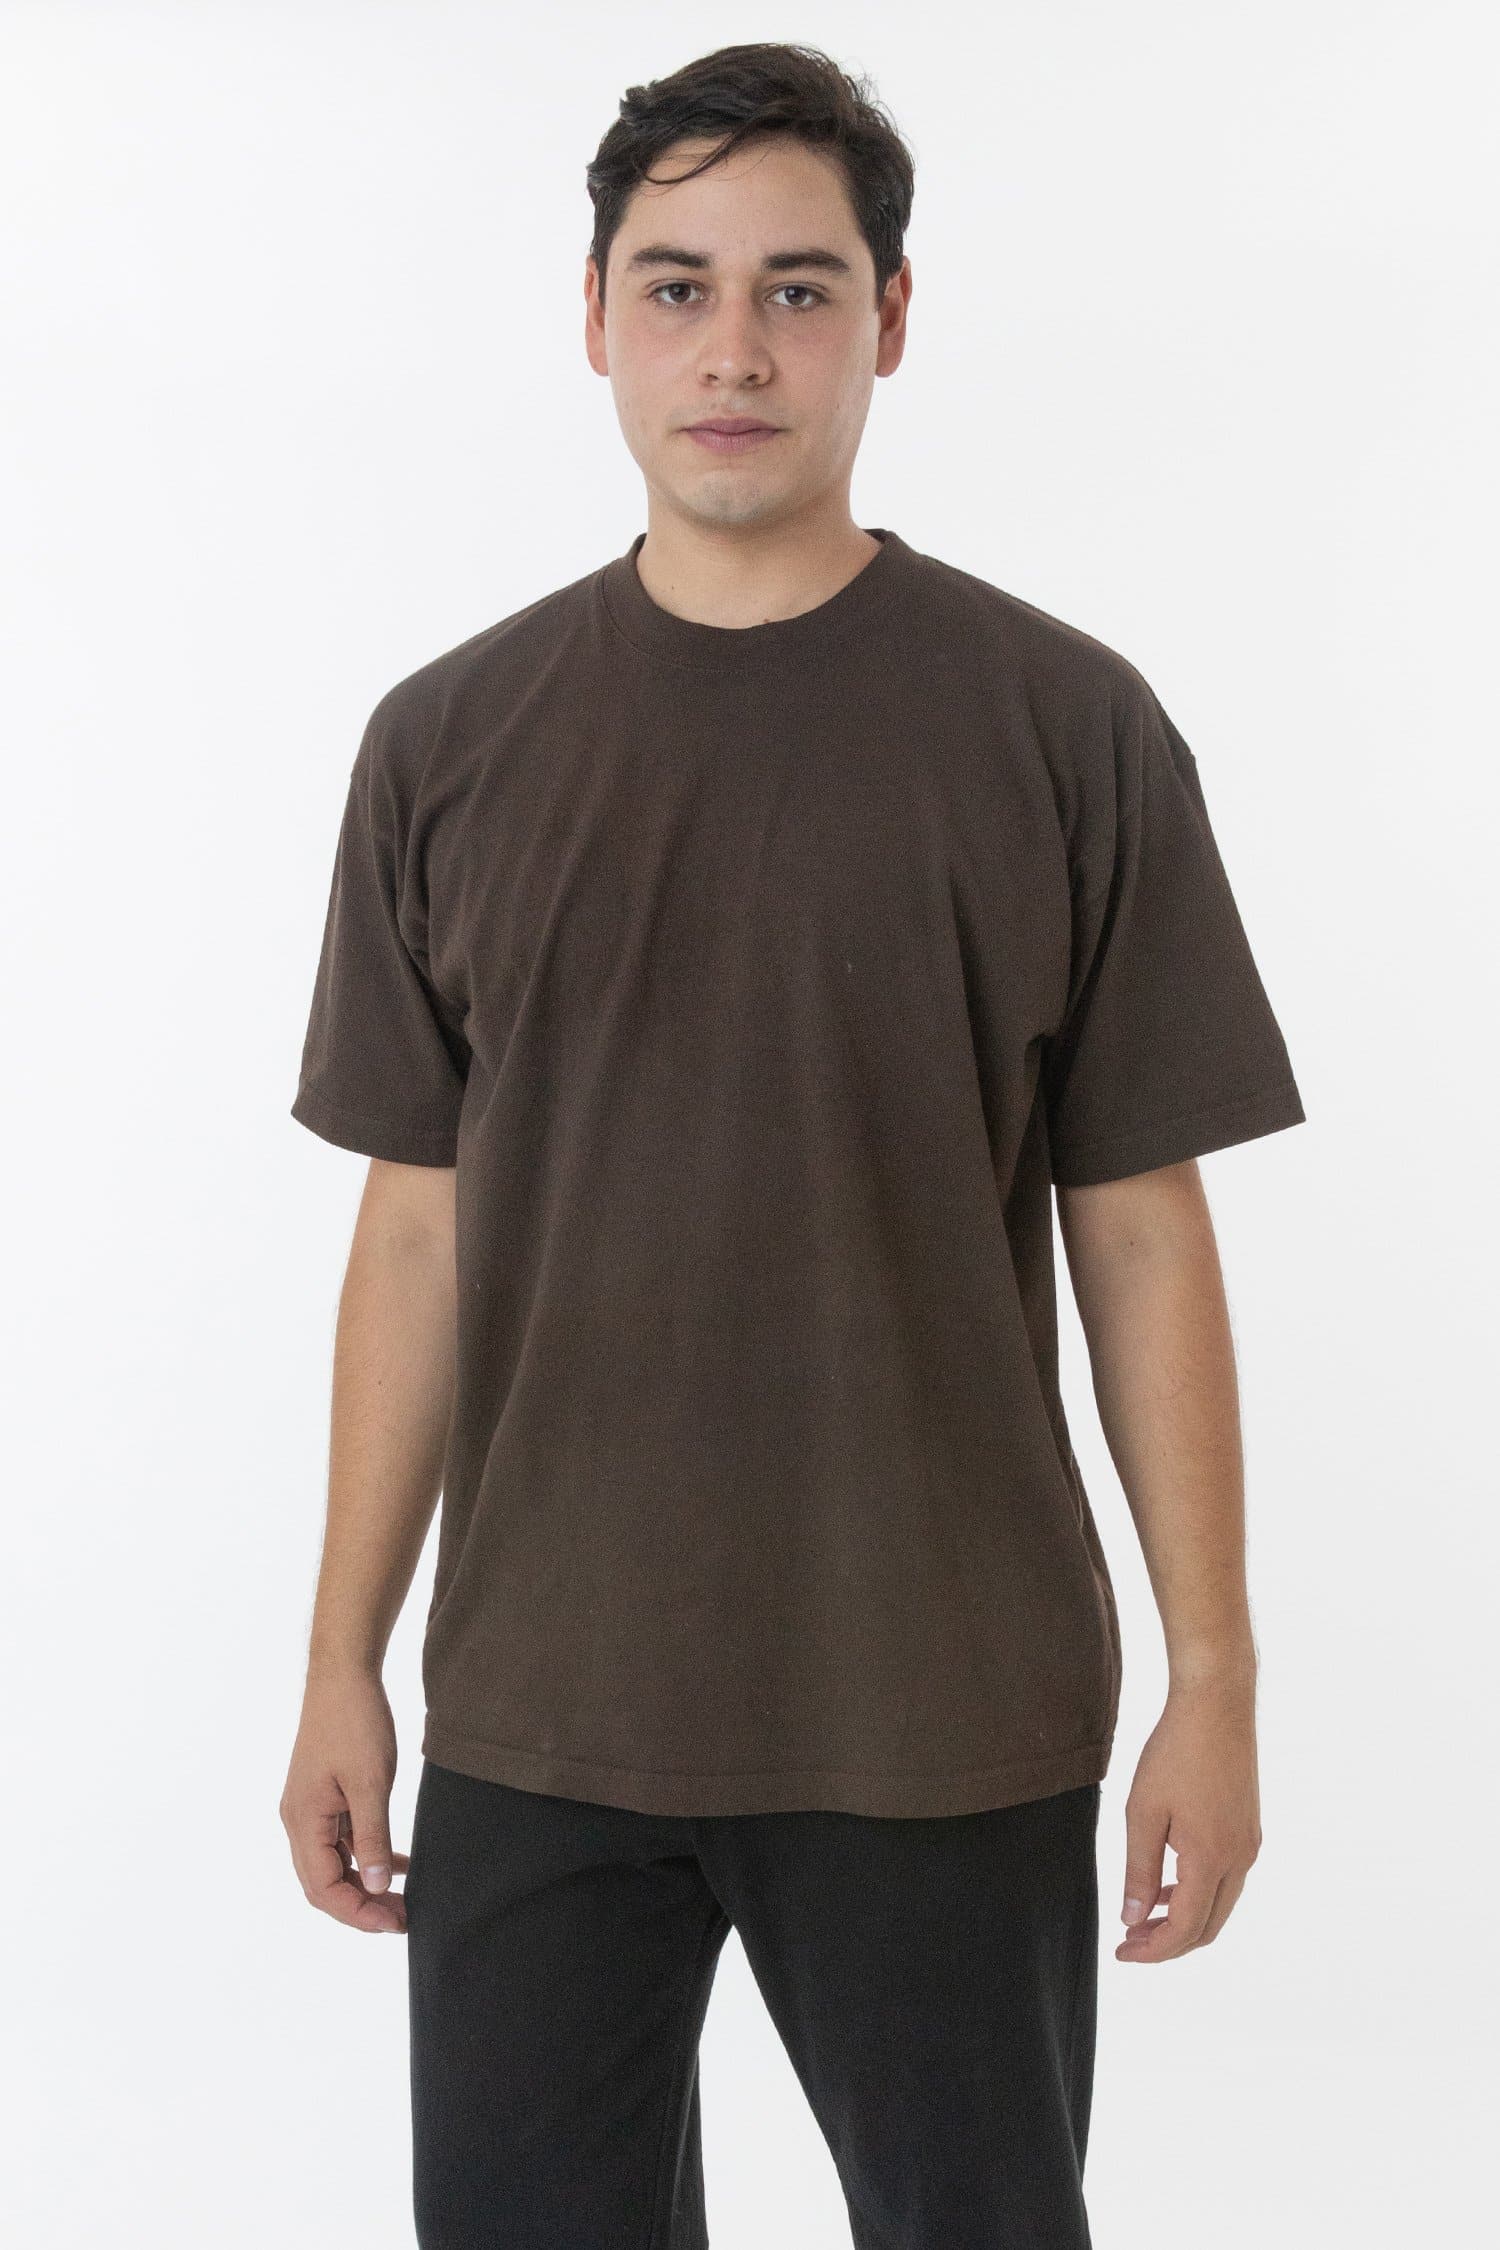 Los Angeles Apparel 1801GD - Heavyweight Garment Dyed Crew Neck T